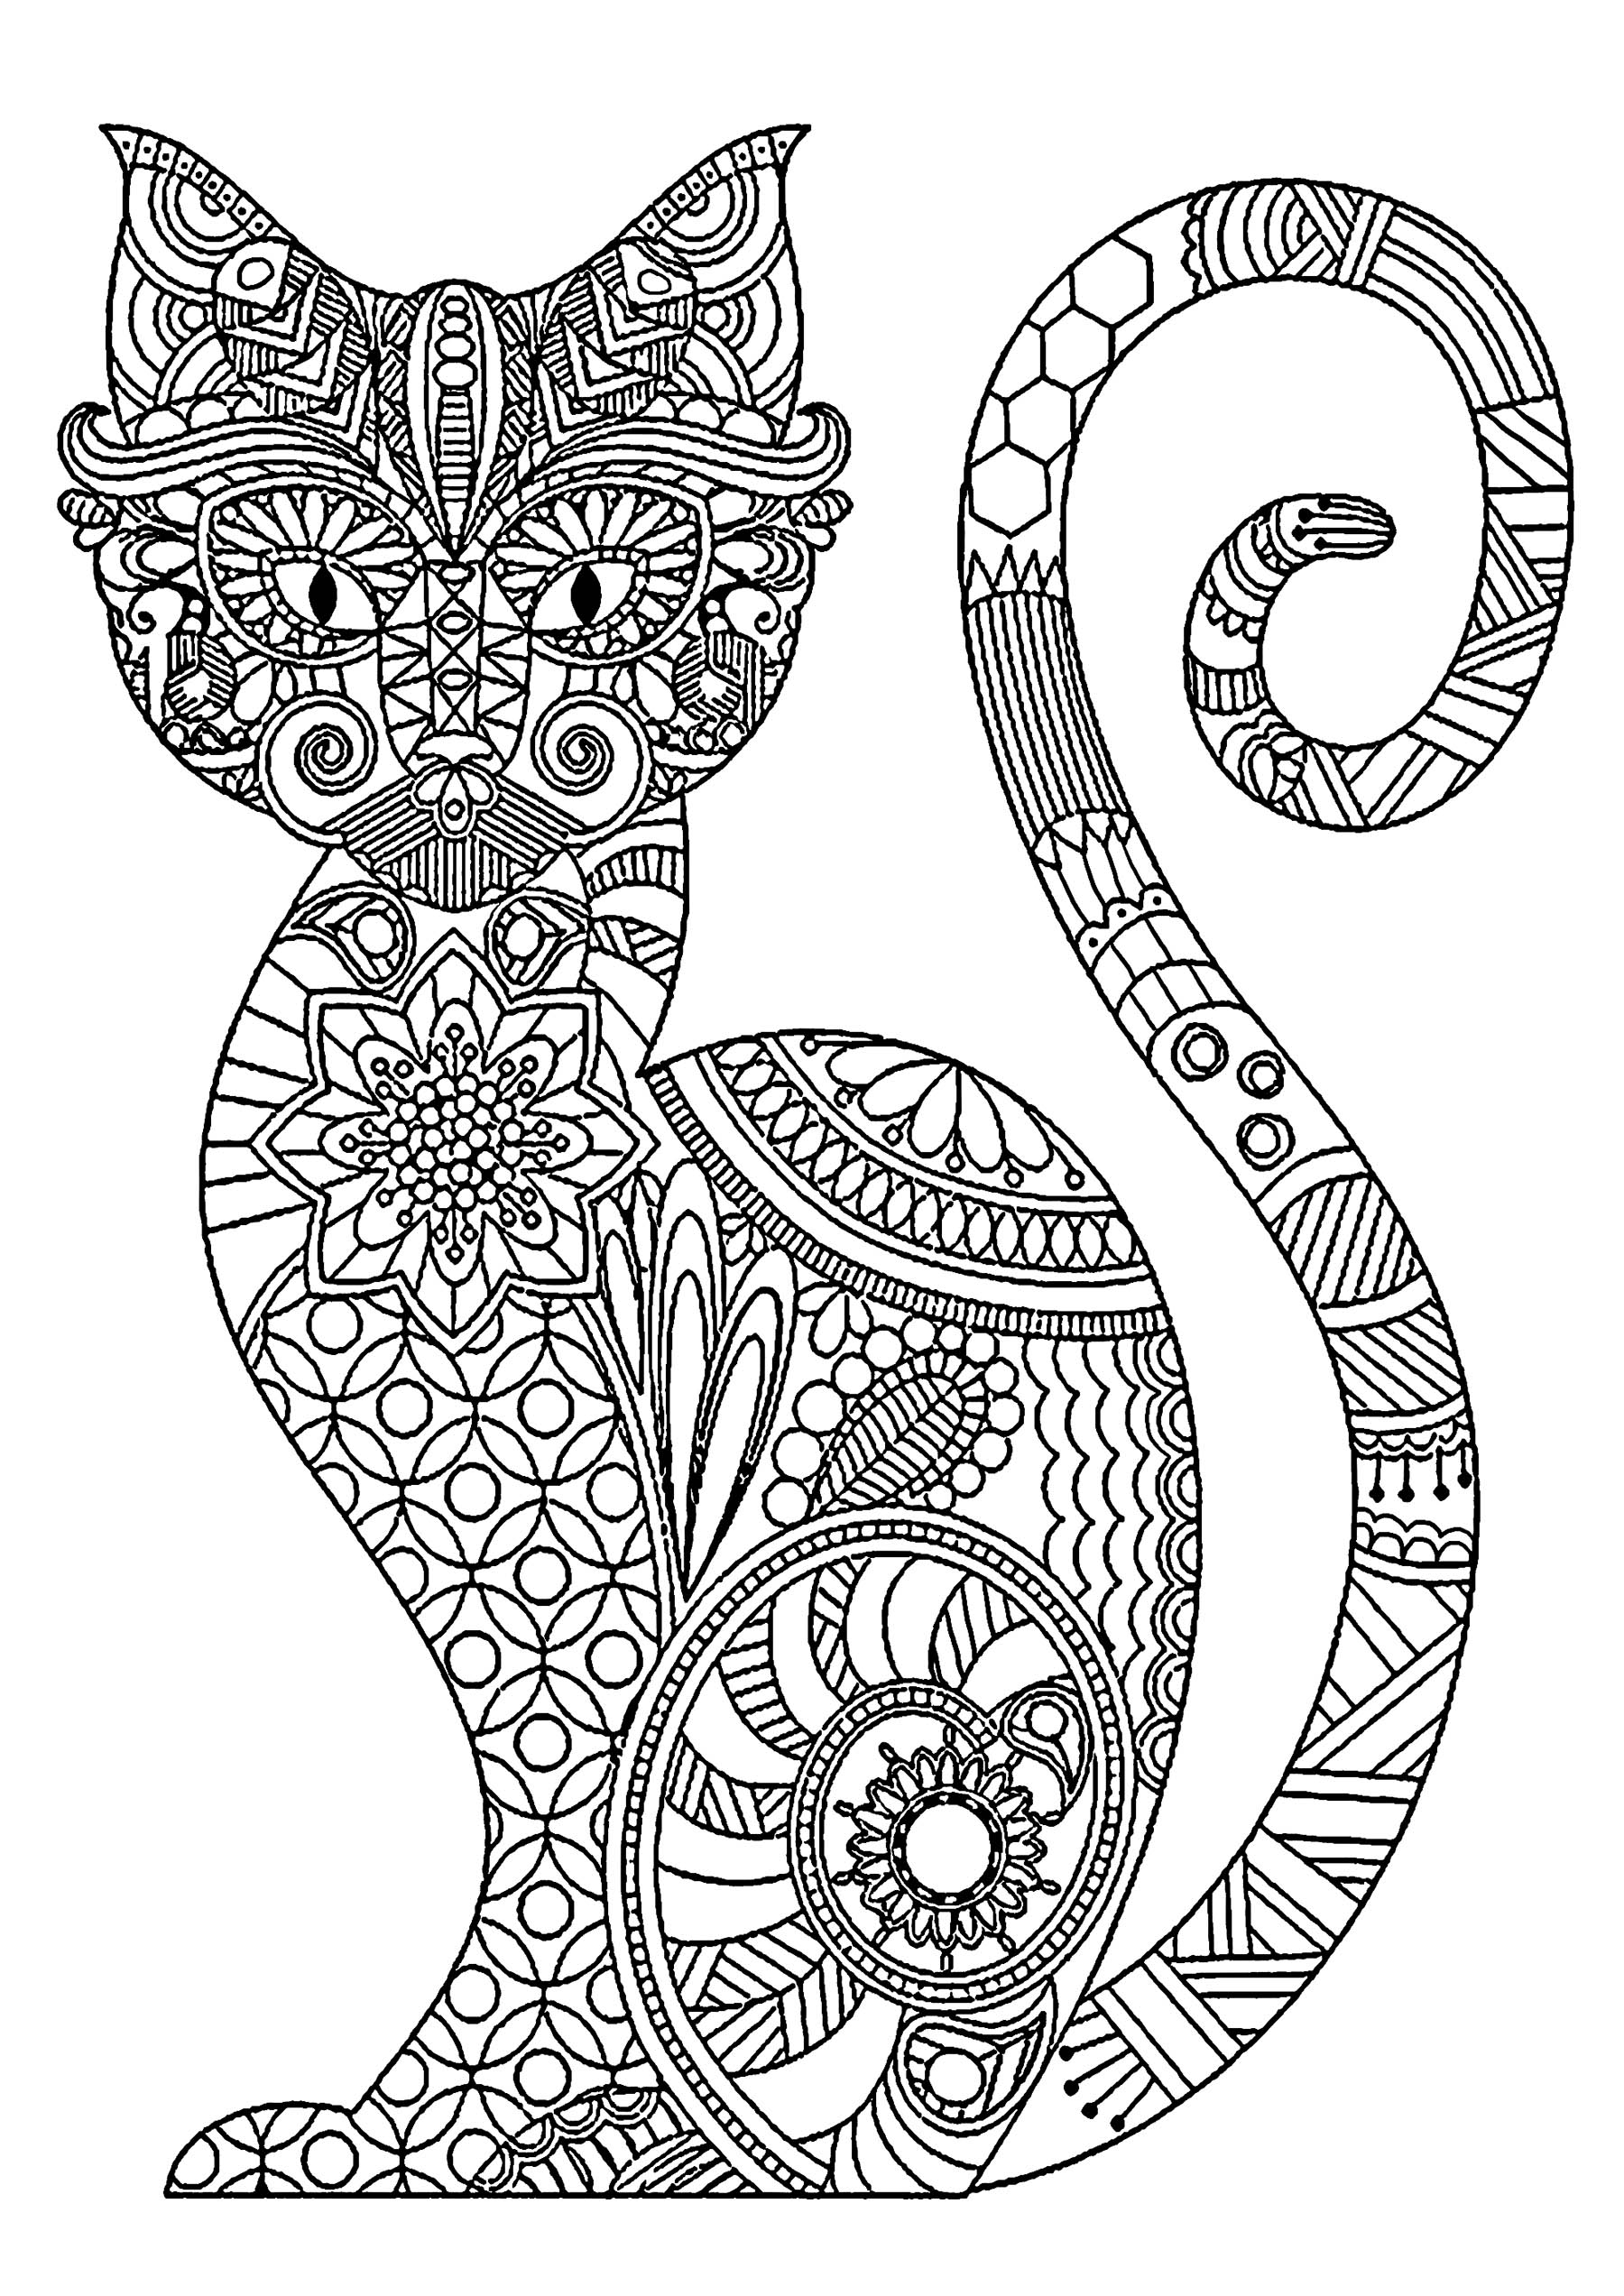 Simple cat coloring pages for kids